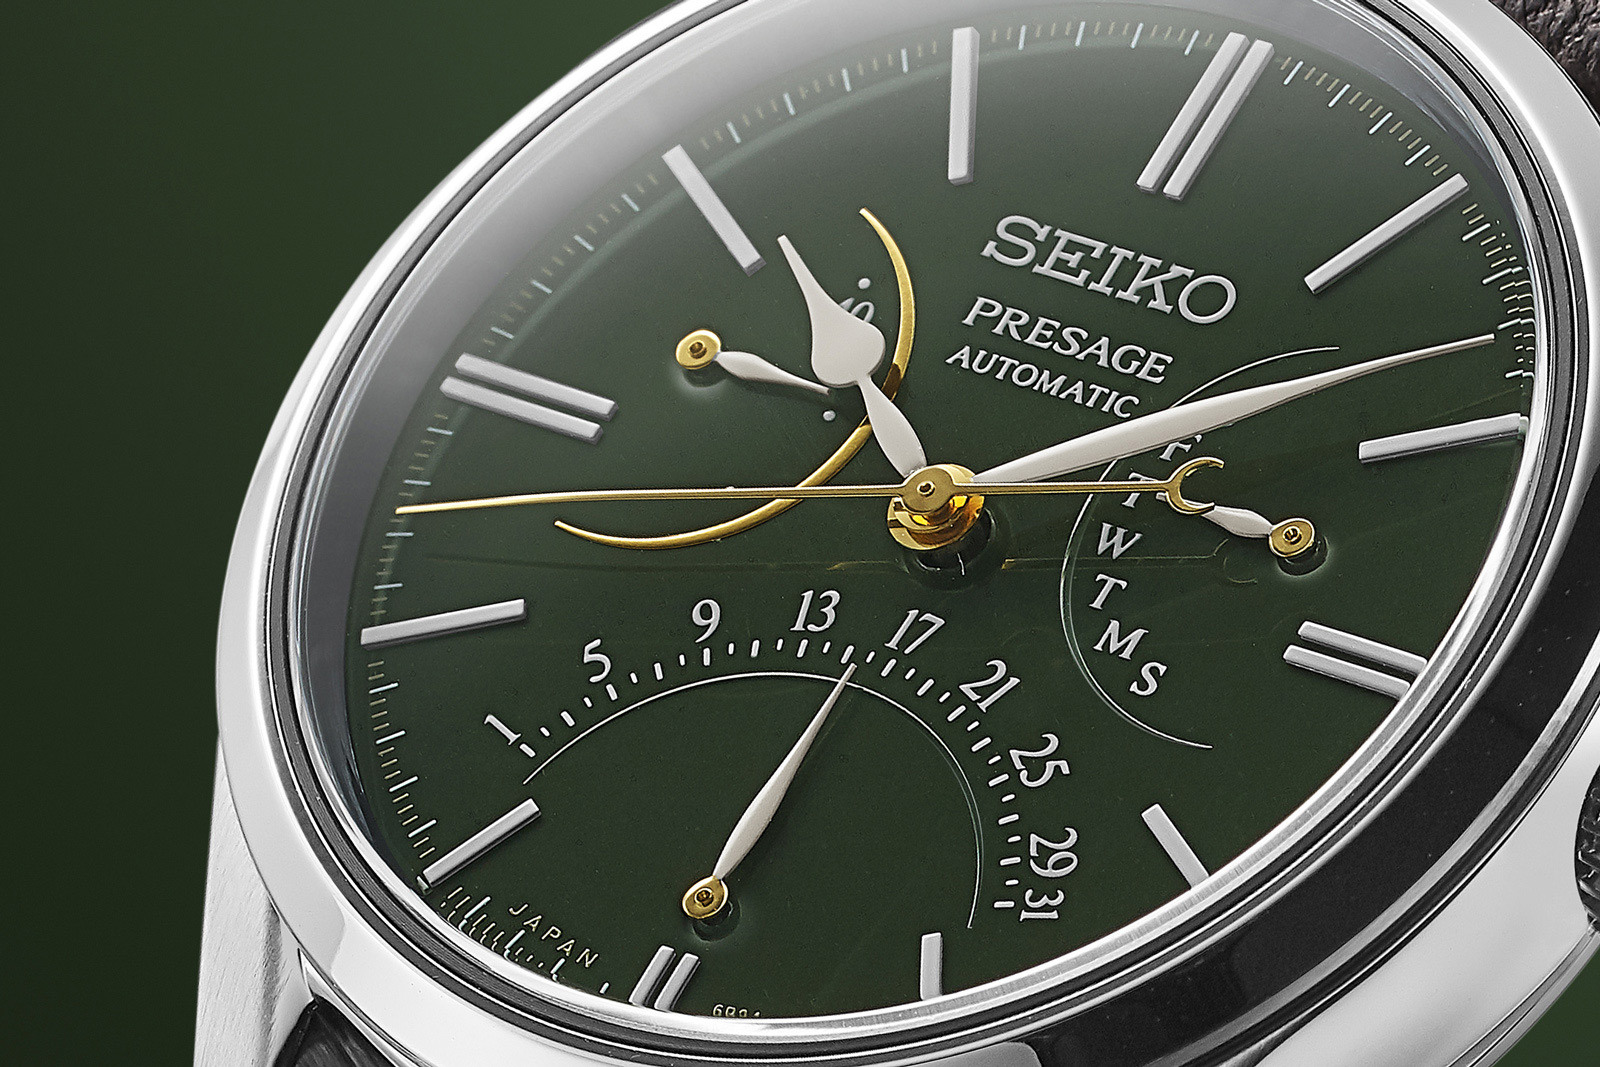 Seiko Introduces the Presage Day-Date in Green Urushi | SJX Watches